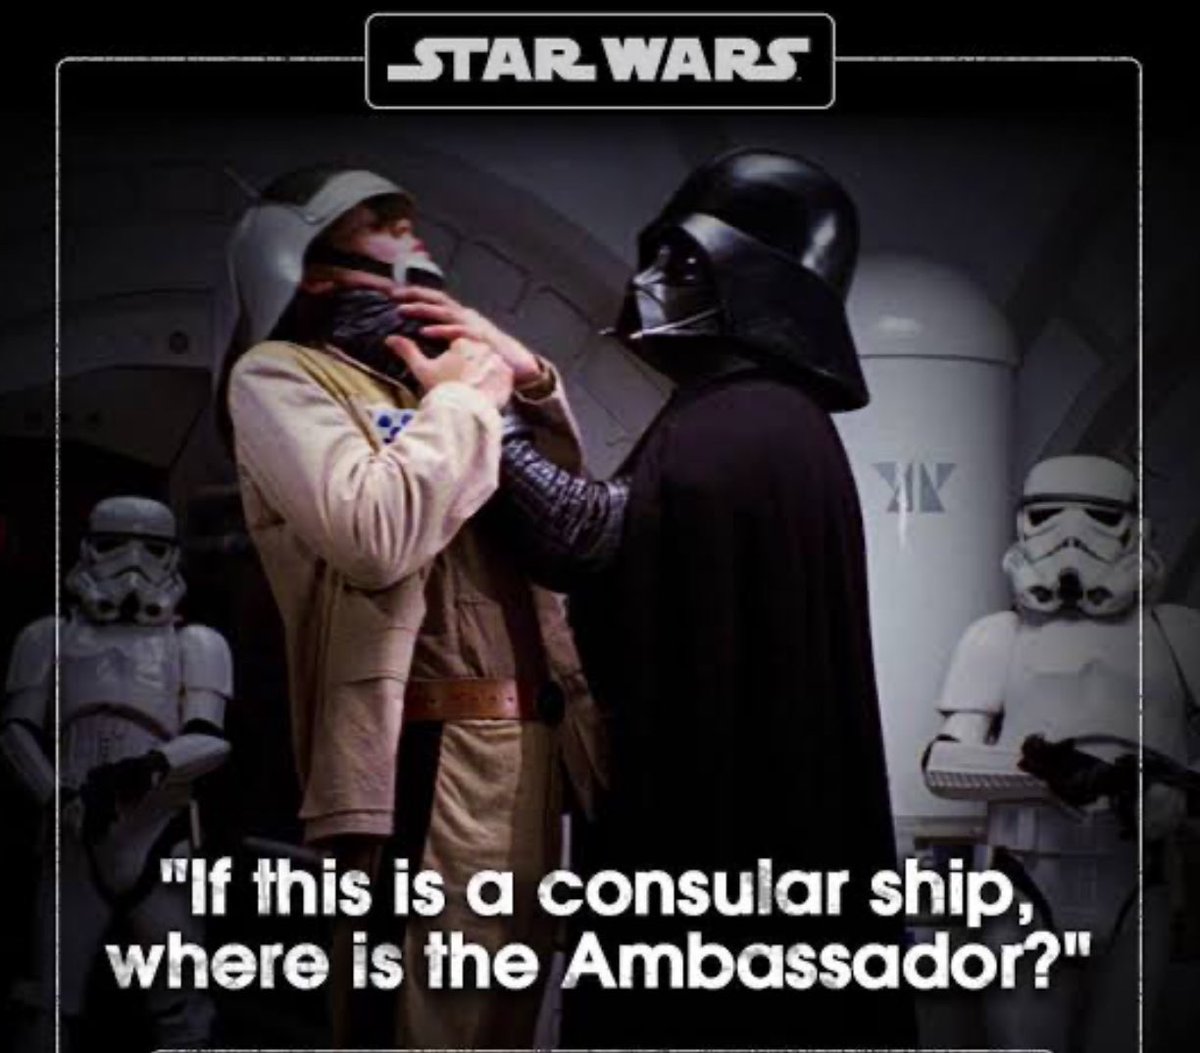 Hey #Darth, he or she is at the #embassy. At a #consulate the top official is the Consular General #wida #StarWars #StarWarsDay #Maythe4bewithyou